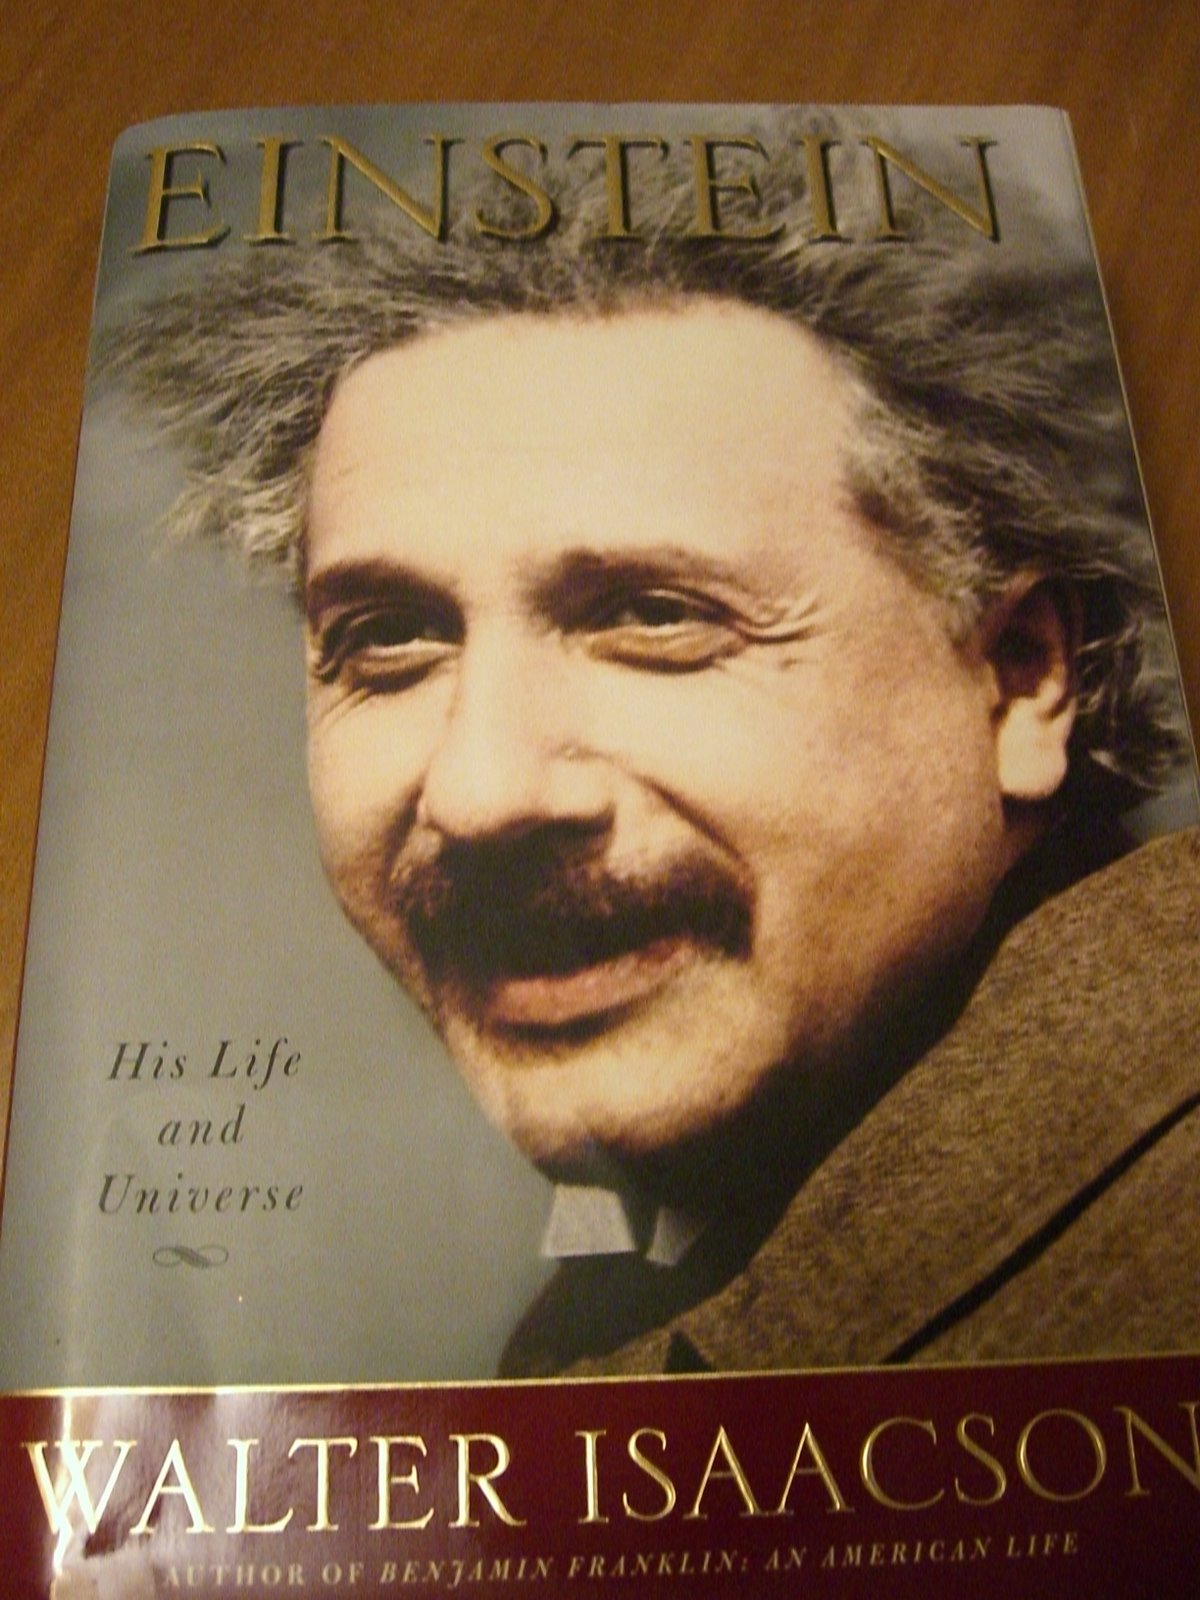 Einstein: His Life and Universe   by Walter Isaacson